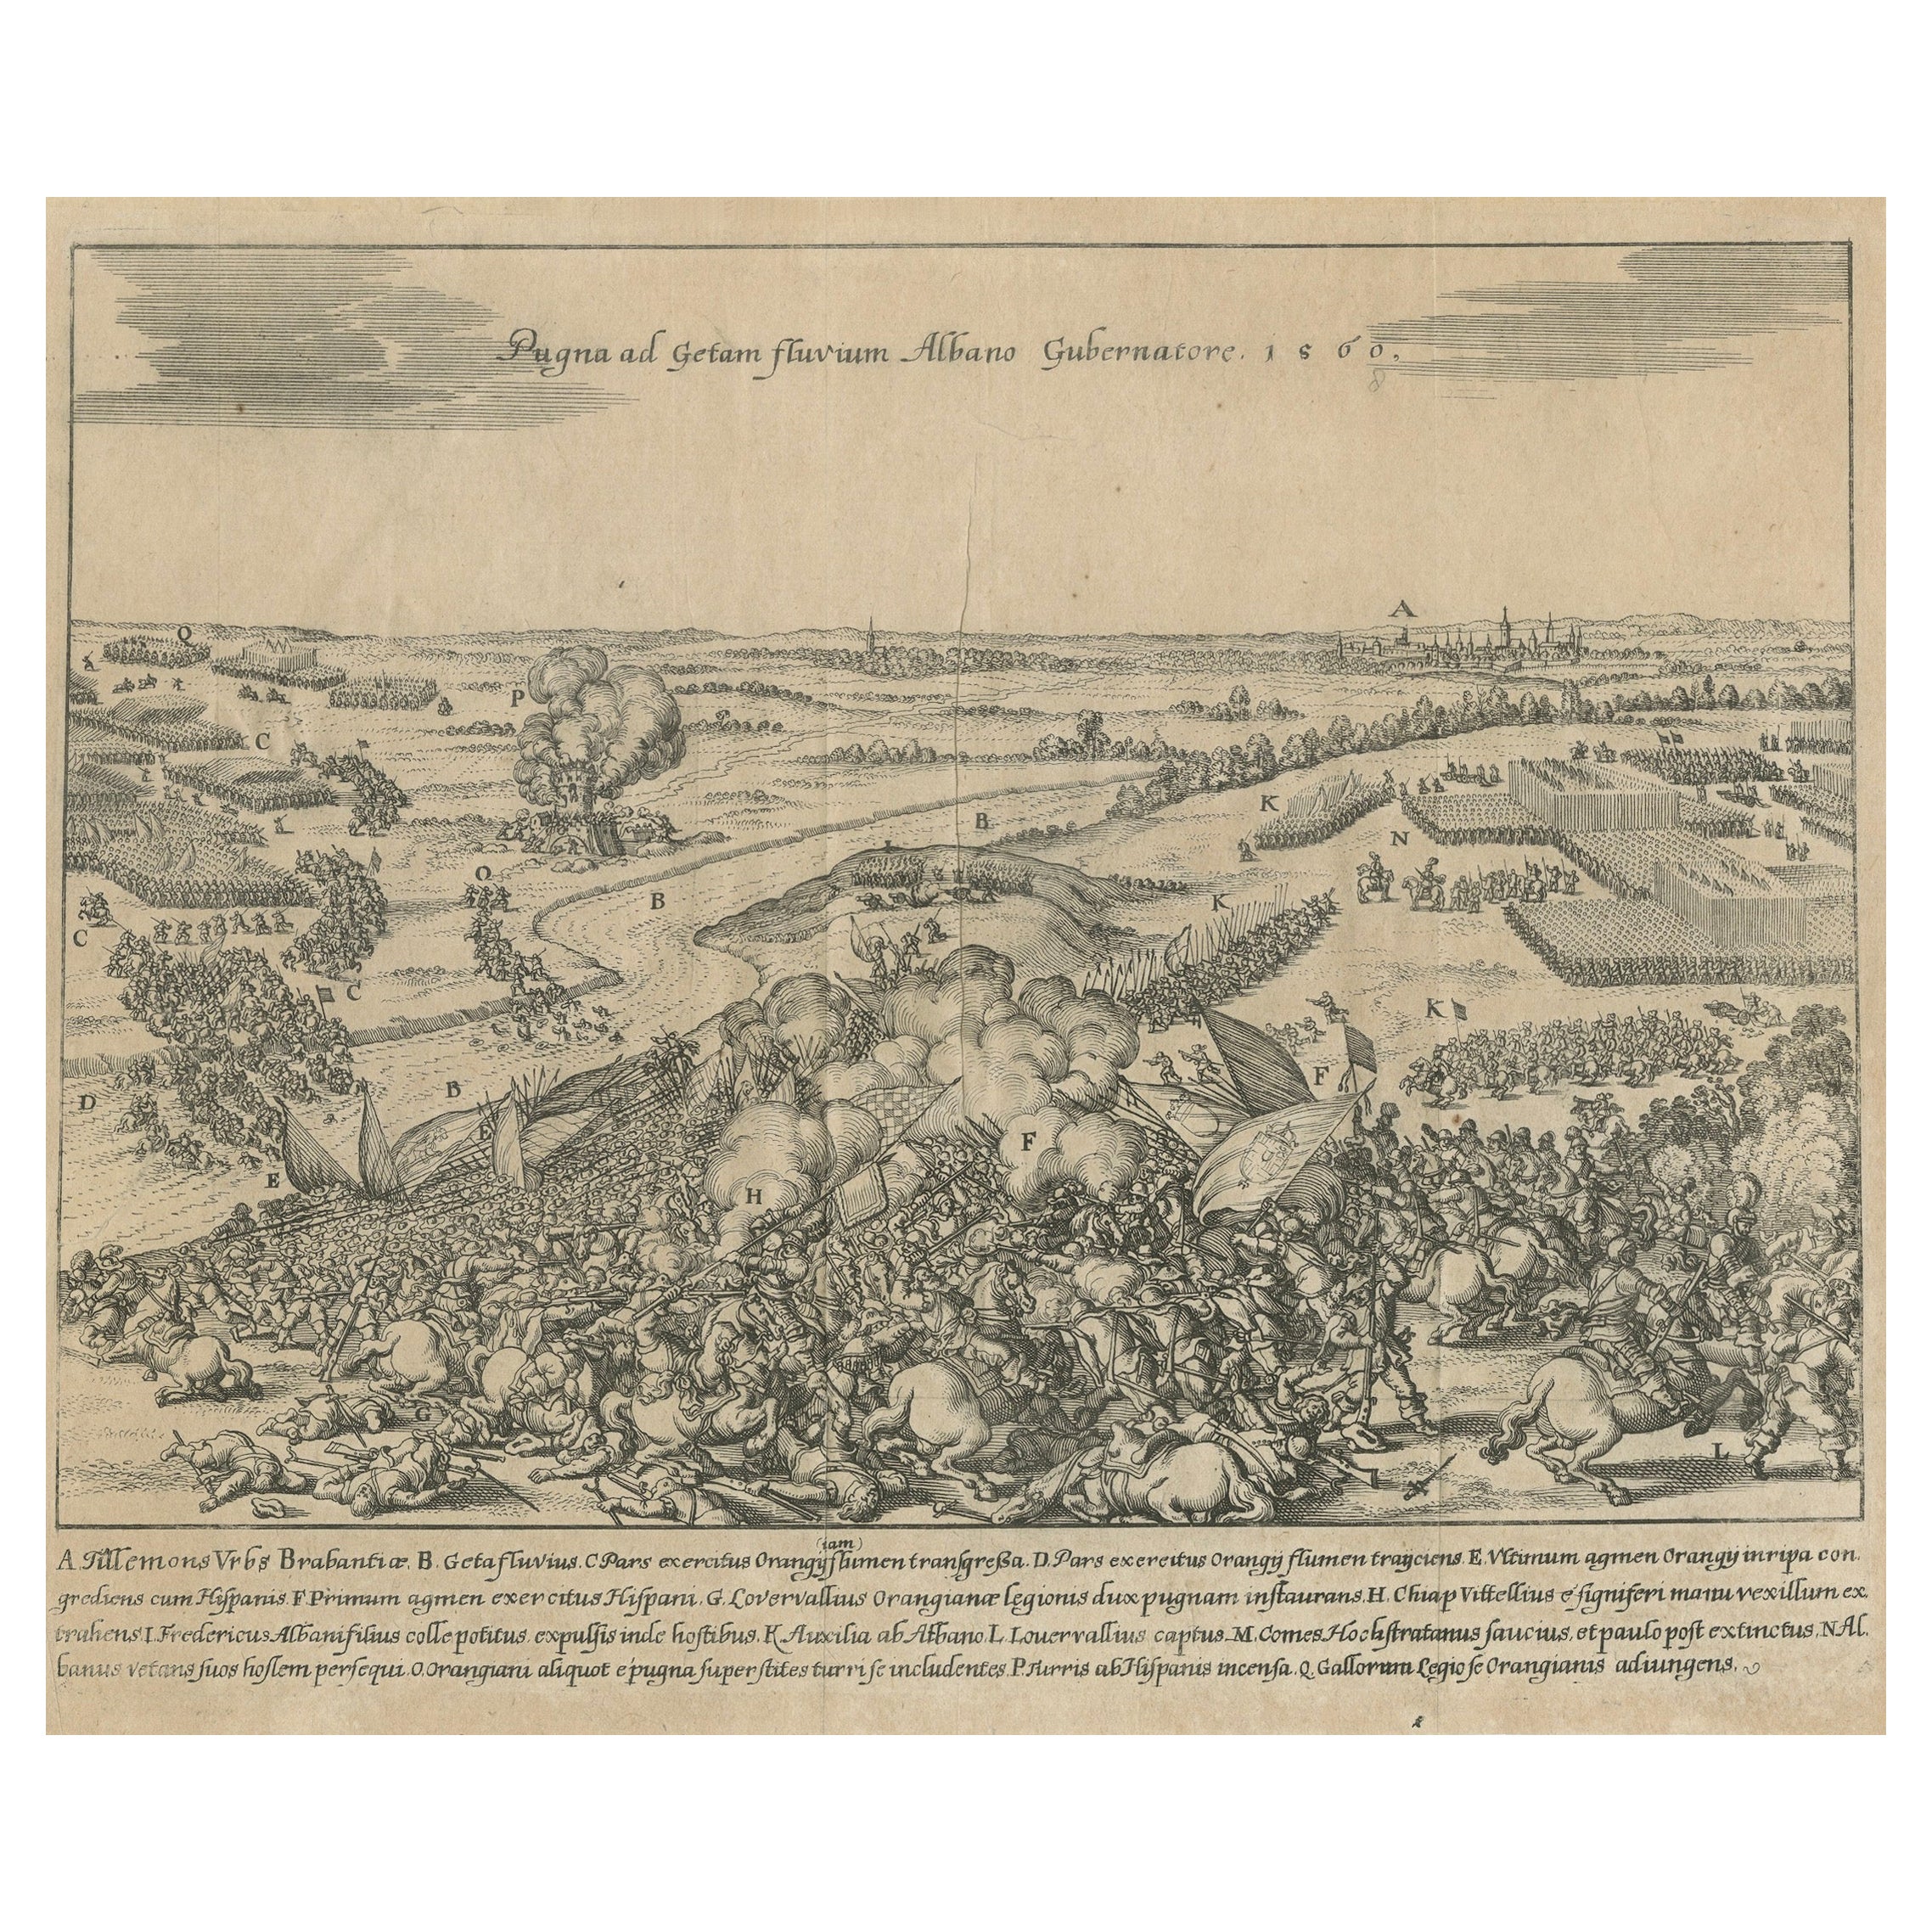 Defeat at River Gete: The Fall of Orange to Alva in 1568, Published in 1730